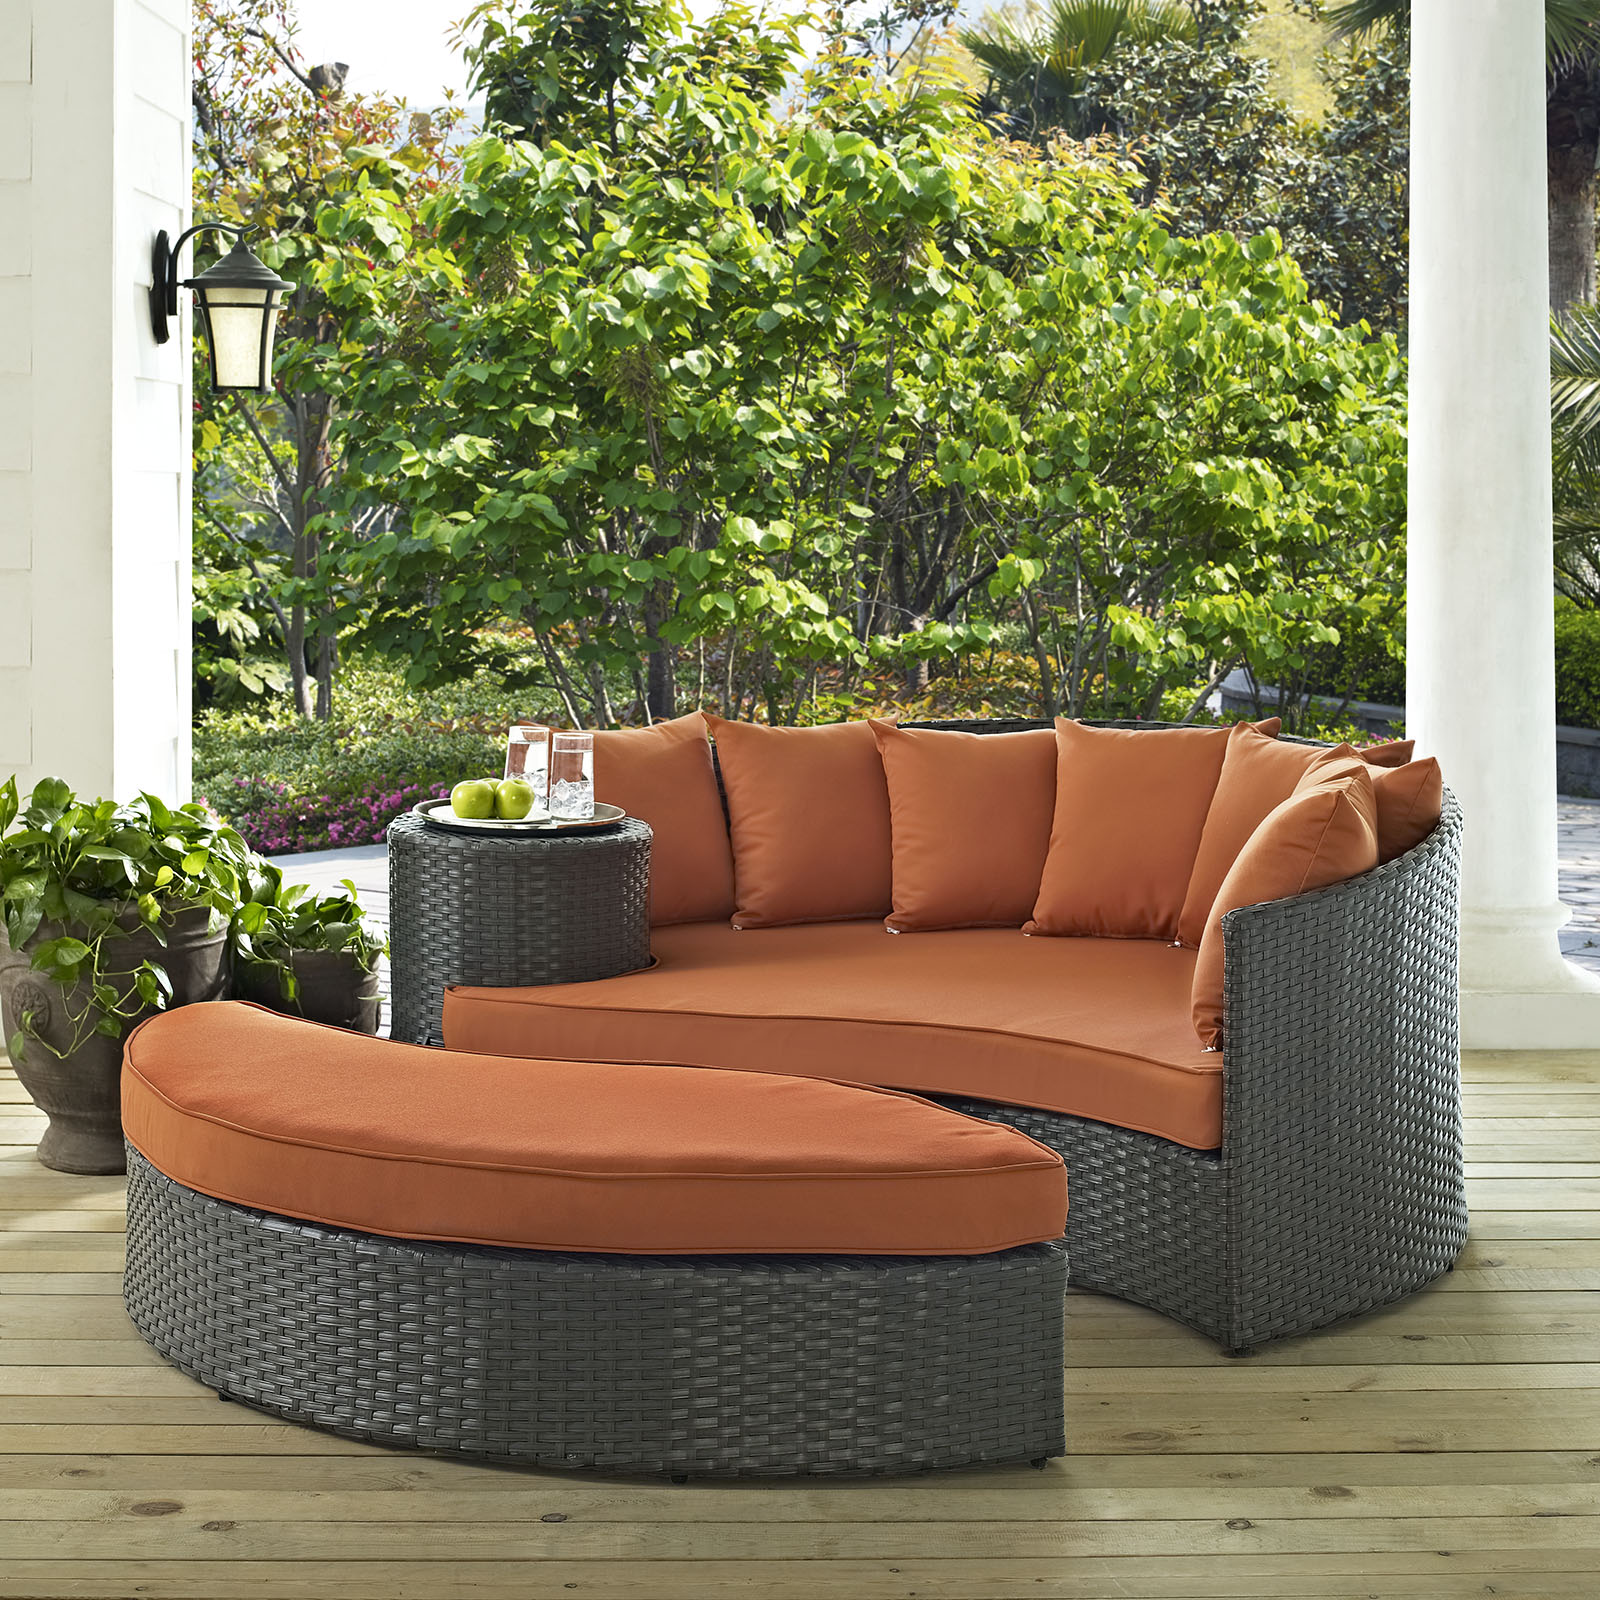 LexMod Sojourn Outdoor Patio Sunbrella® Daybed in Canvas Tuscan